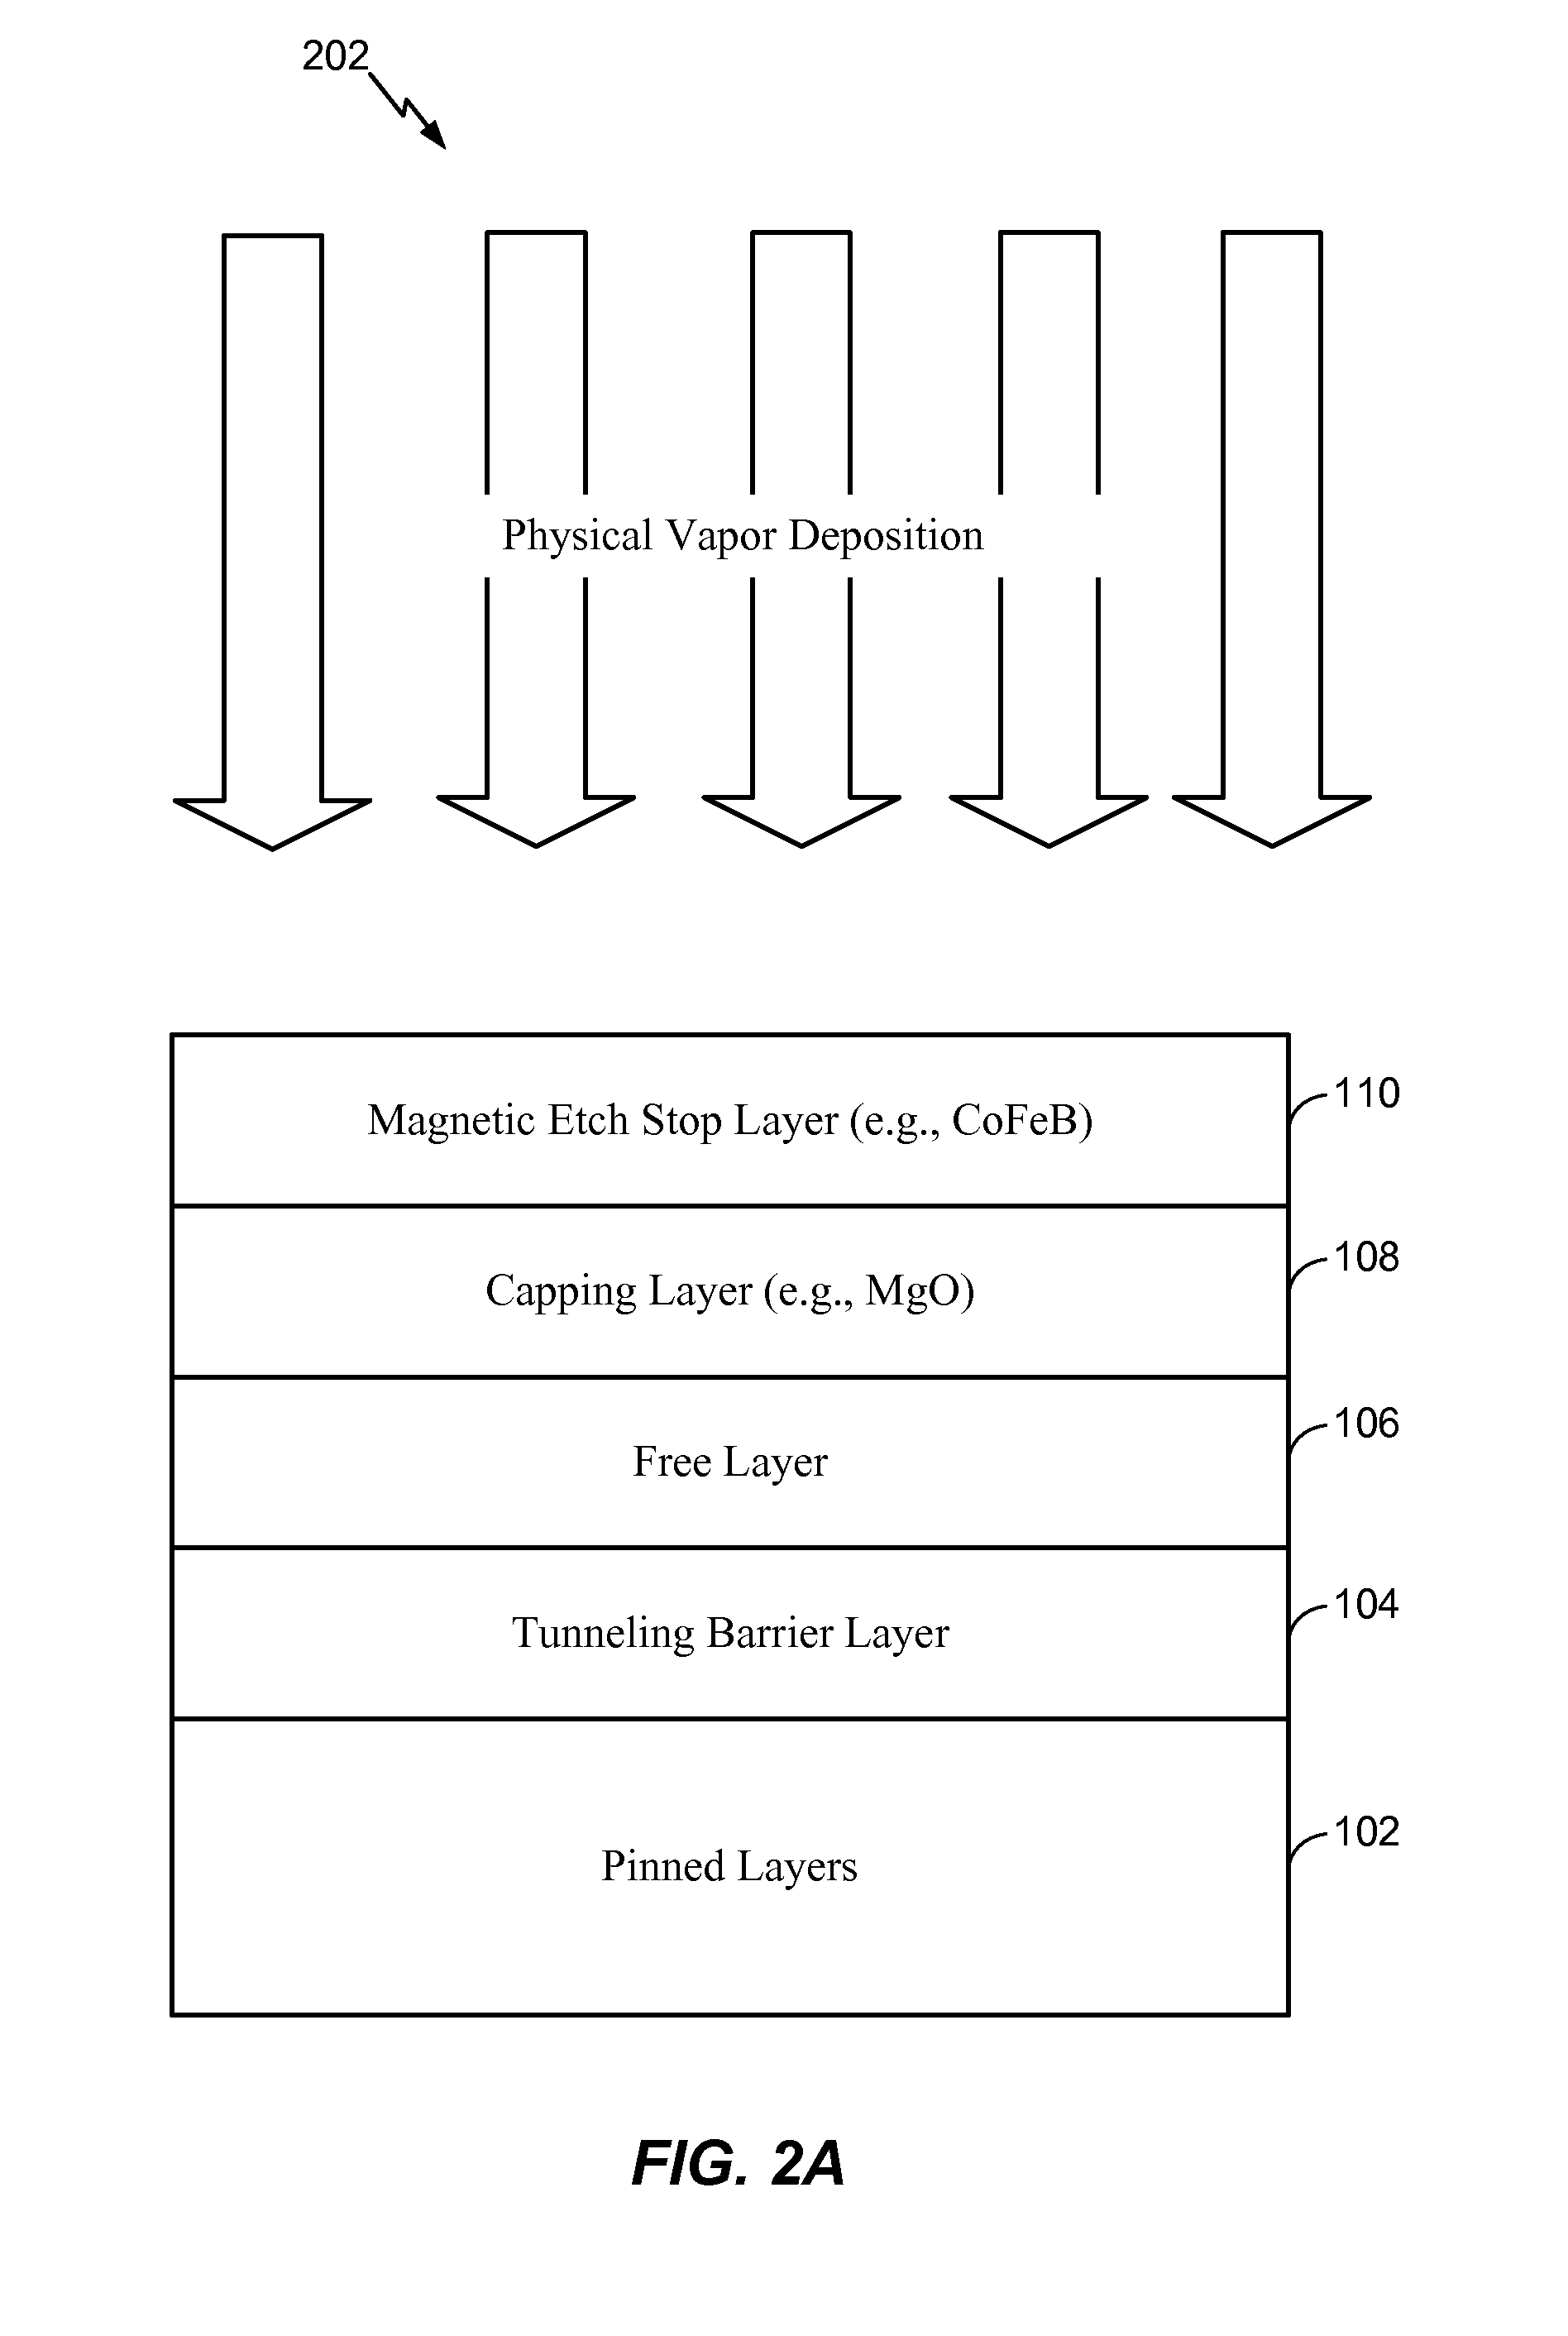 Magnetic etch stop layer for spin-transfer torque magnetoresistive random access memory magnetic tunnel junction device